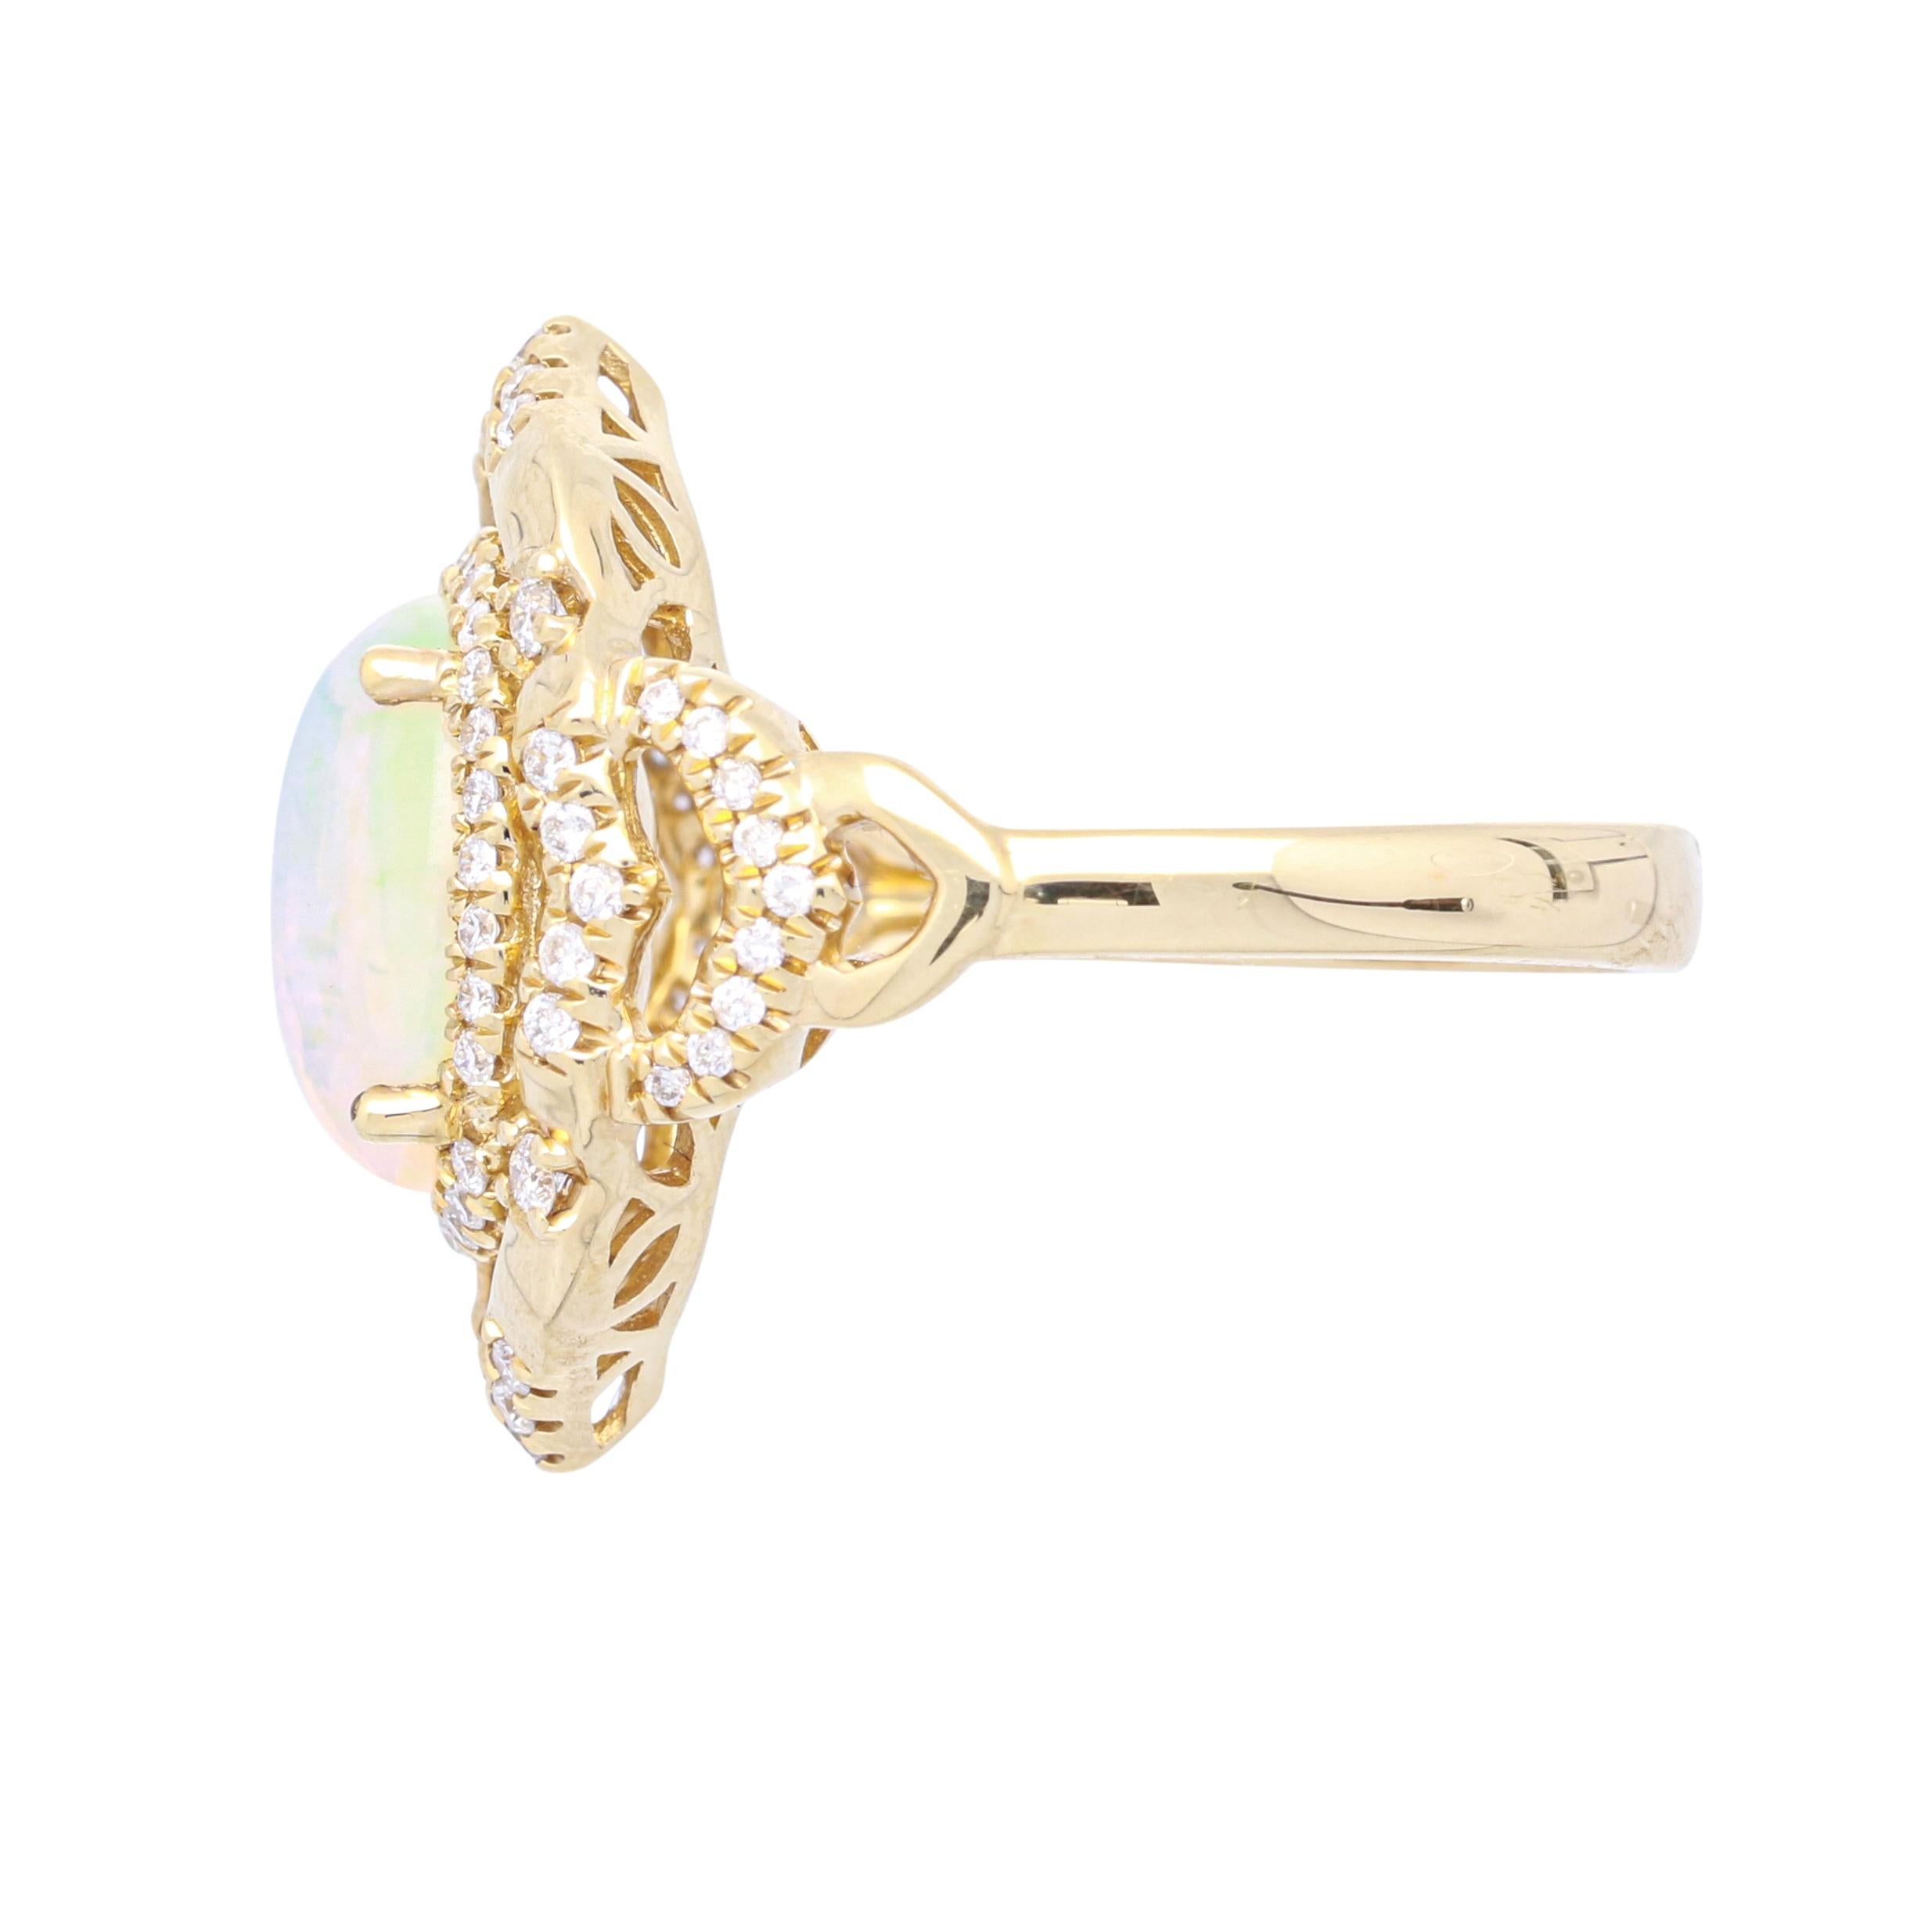 This one of a kind ring is crafted in 14-karat Yellow gold and features an oval cut 2 1/3 carat Ethiopian Opal & 72 Round Diamond  2/5 Ct in a prong-setting. This ring comes in size 7 and it is a perfect gift either for yourself or someone you love.